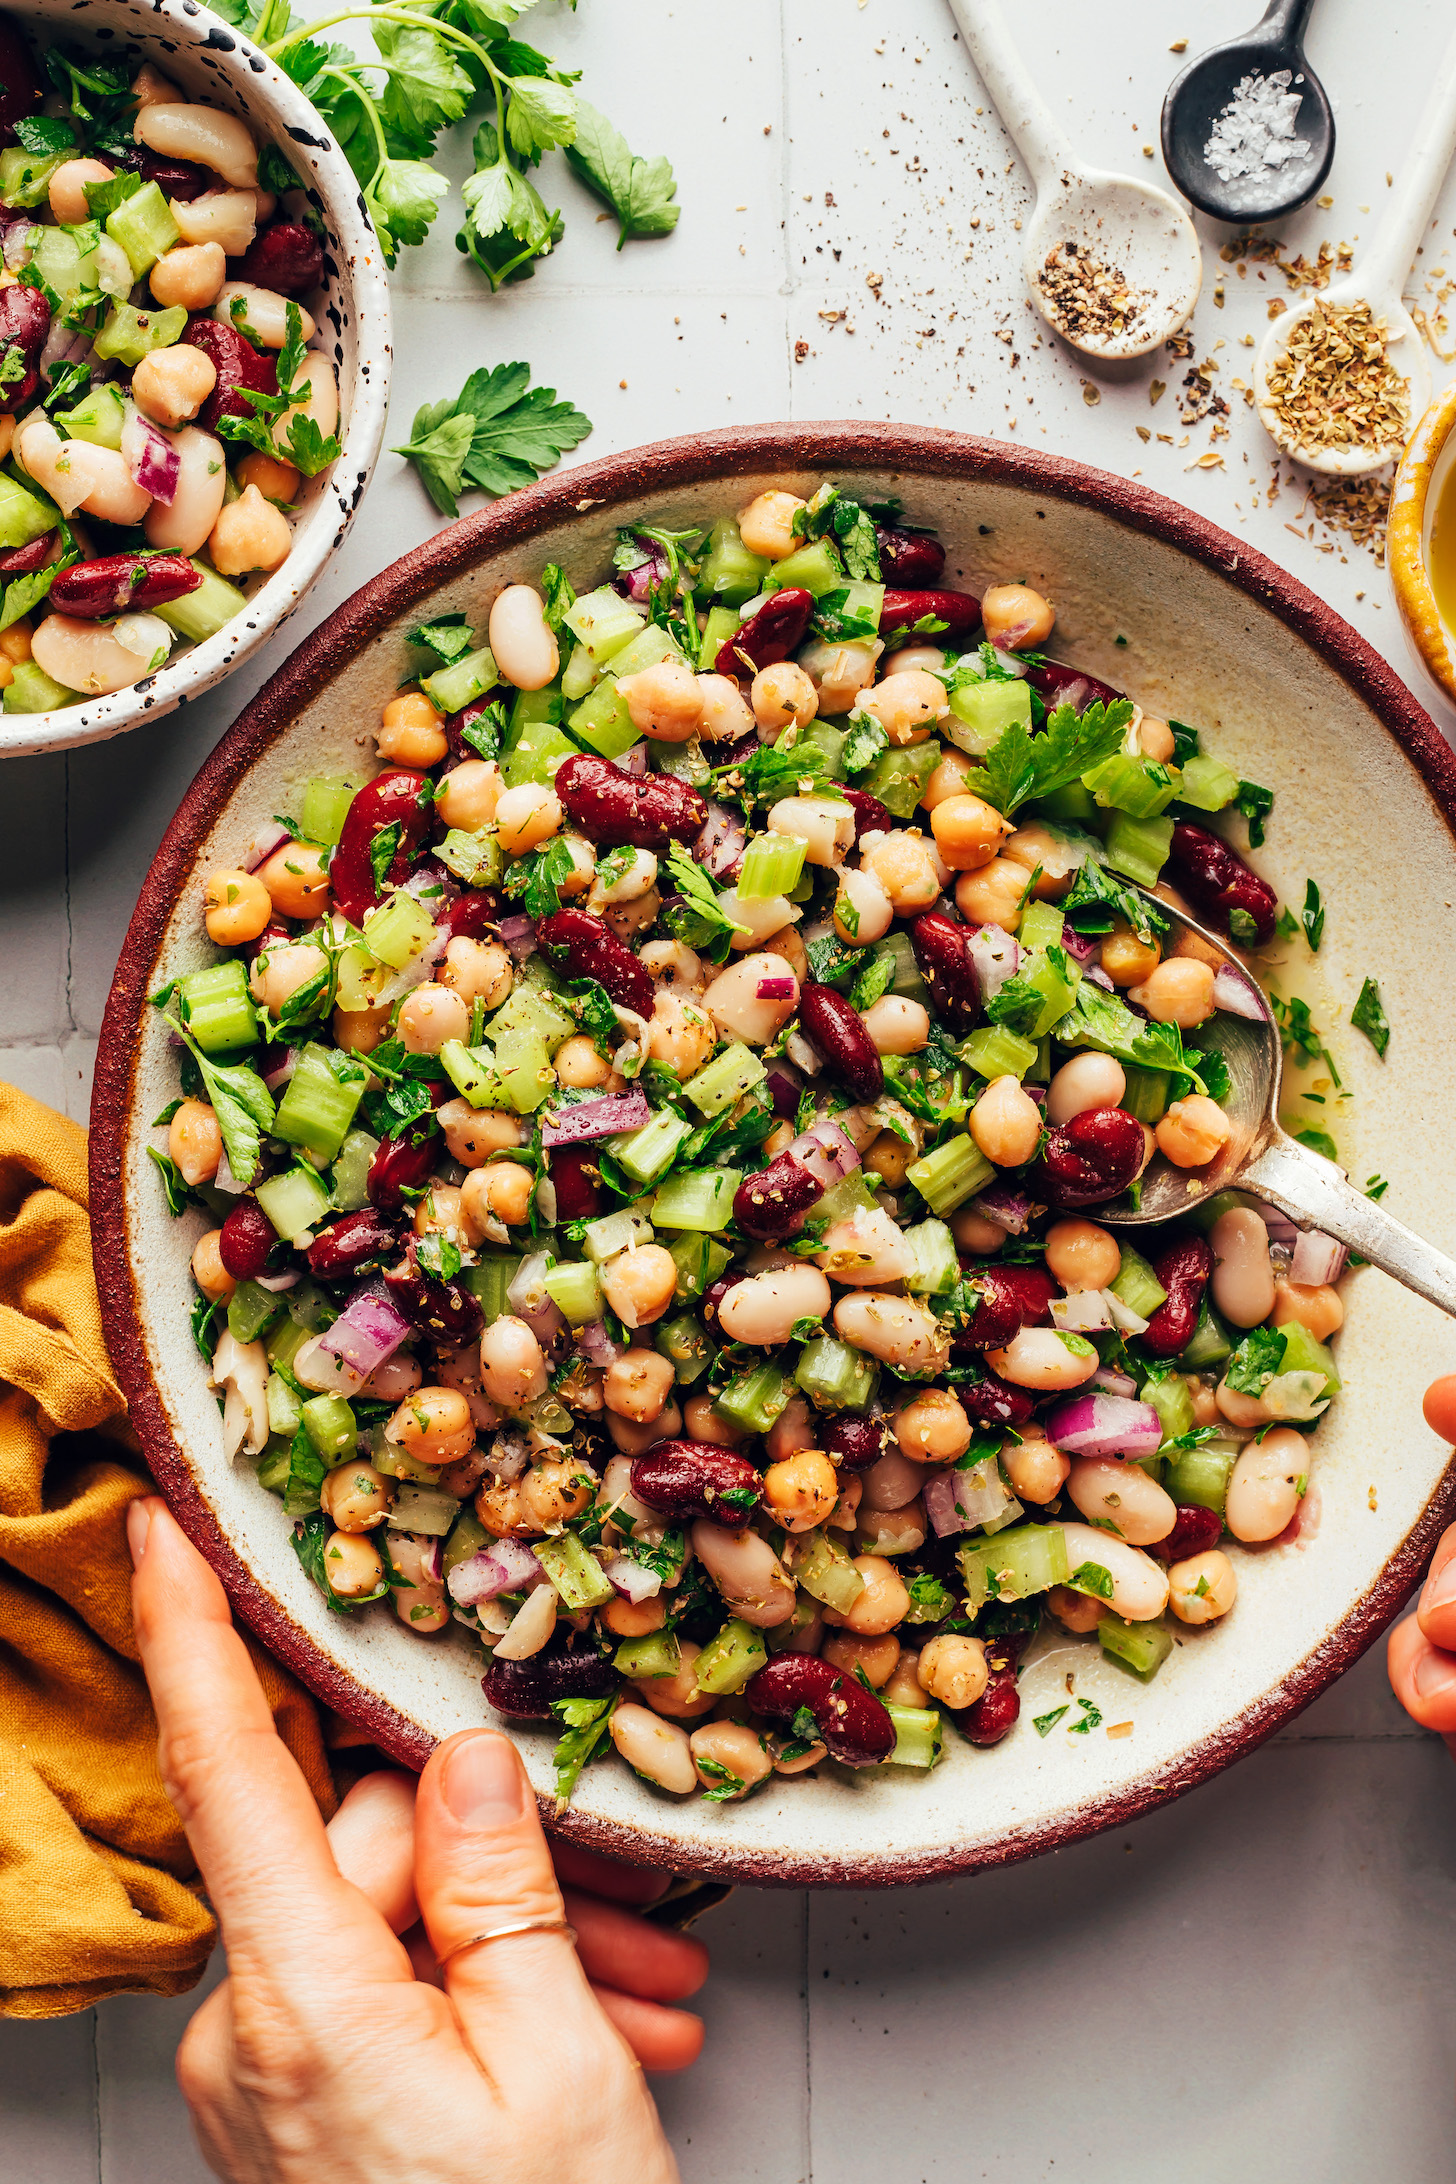 Hands holding a spoon and the side of a bowl of our easy three bean salad recipe